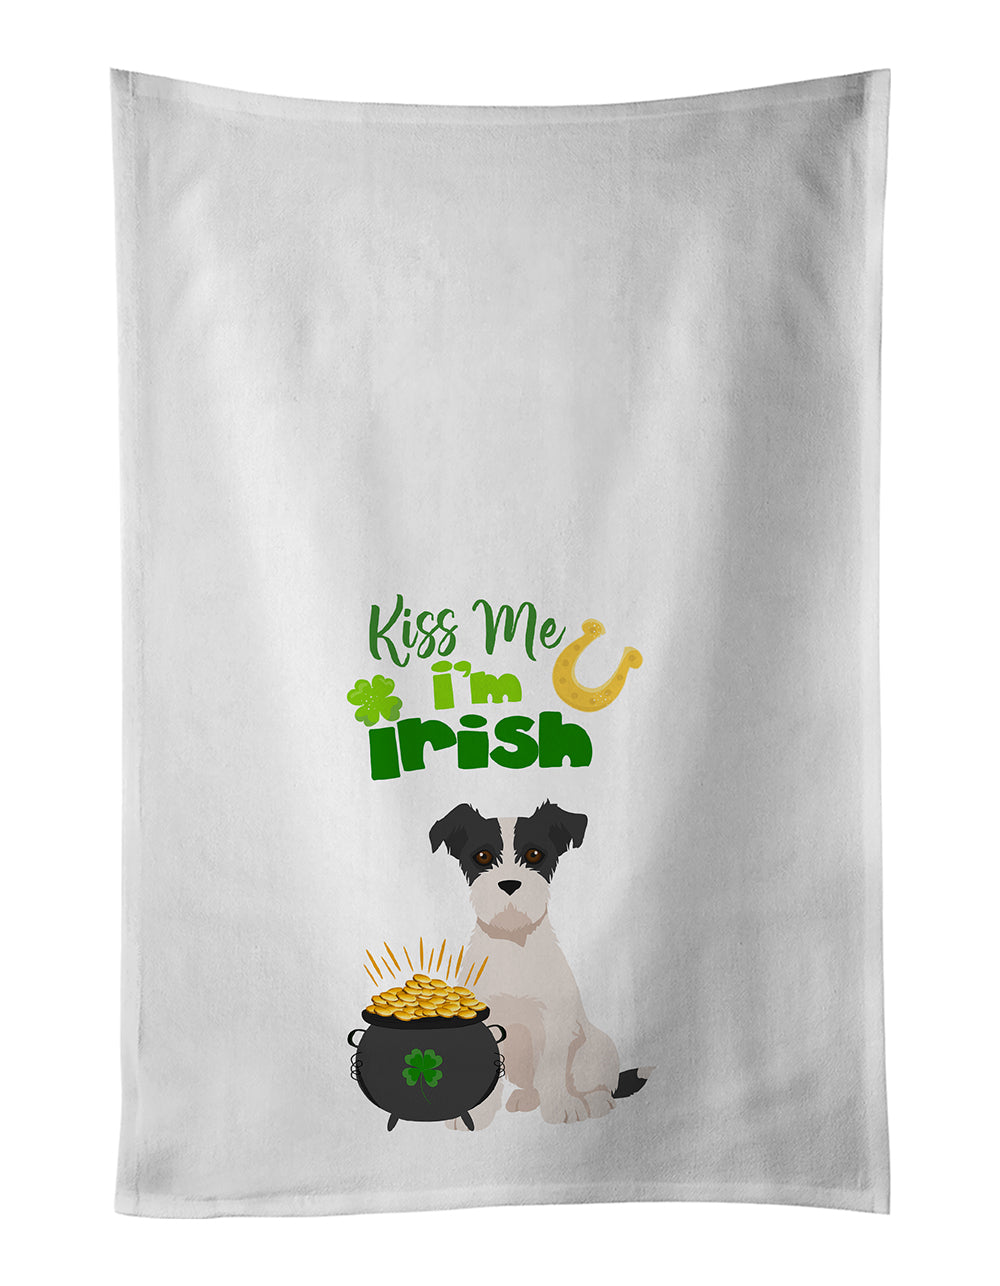 Buy this Black White Wirehair Jack Russell Terrier St. Patrick's Day White Kitchen Towel Set of 2 Dish Towels